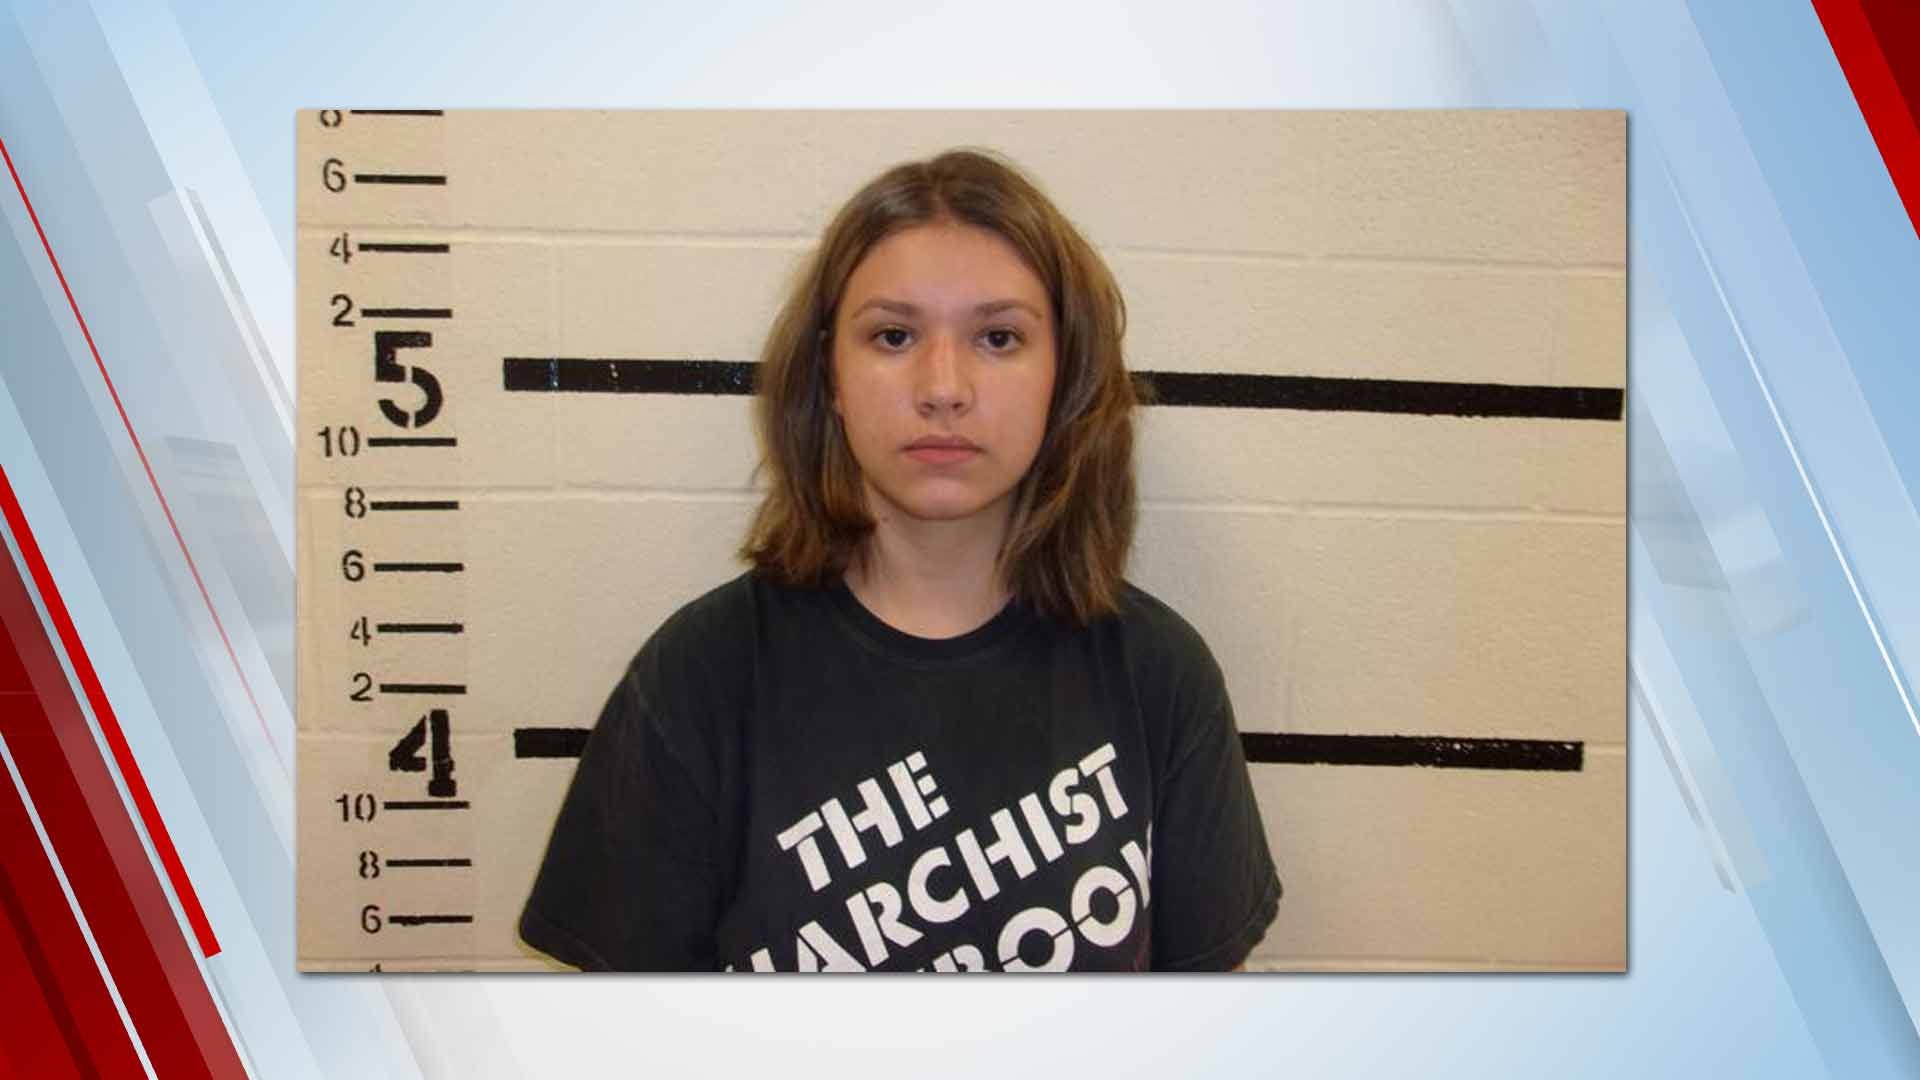 Woman Accused Of Threatening To 'Shoot Up' McAlester High School